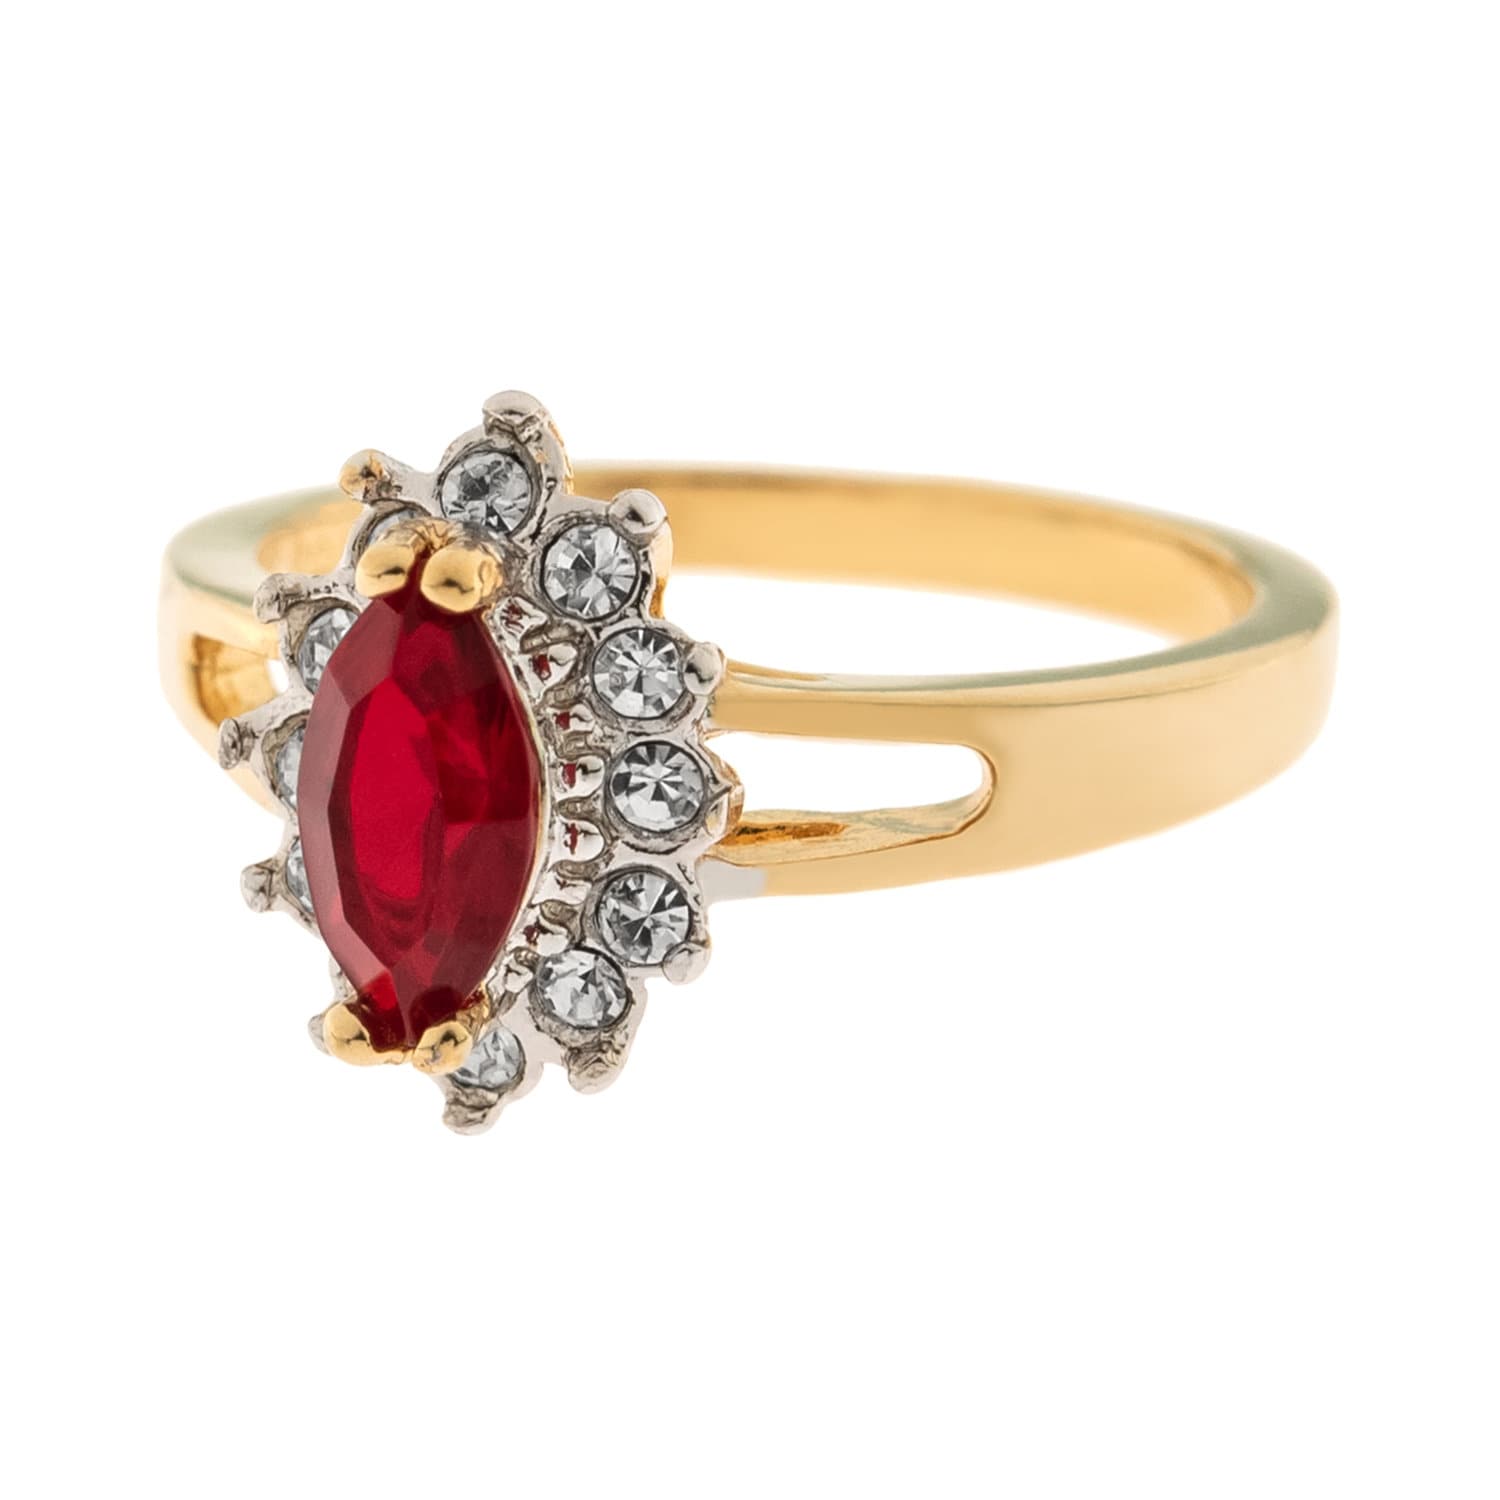 Vintage Ring Ruby and Clear Swarovski Crystals 18kt Gold July Birthstone Antique Rings For Women Jewelry #R1314 - Never Worn - Limited Stock